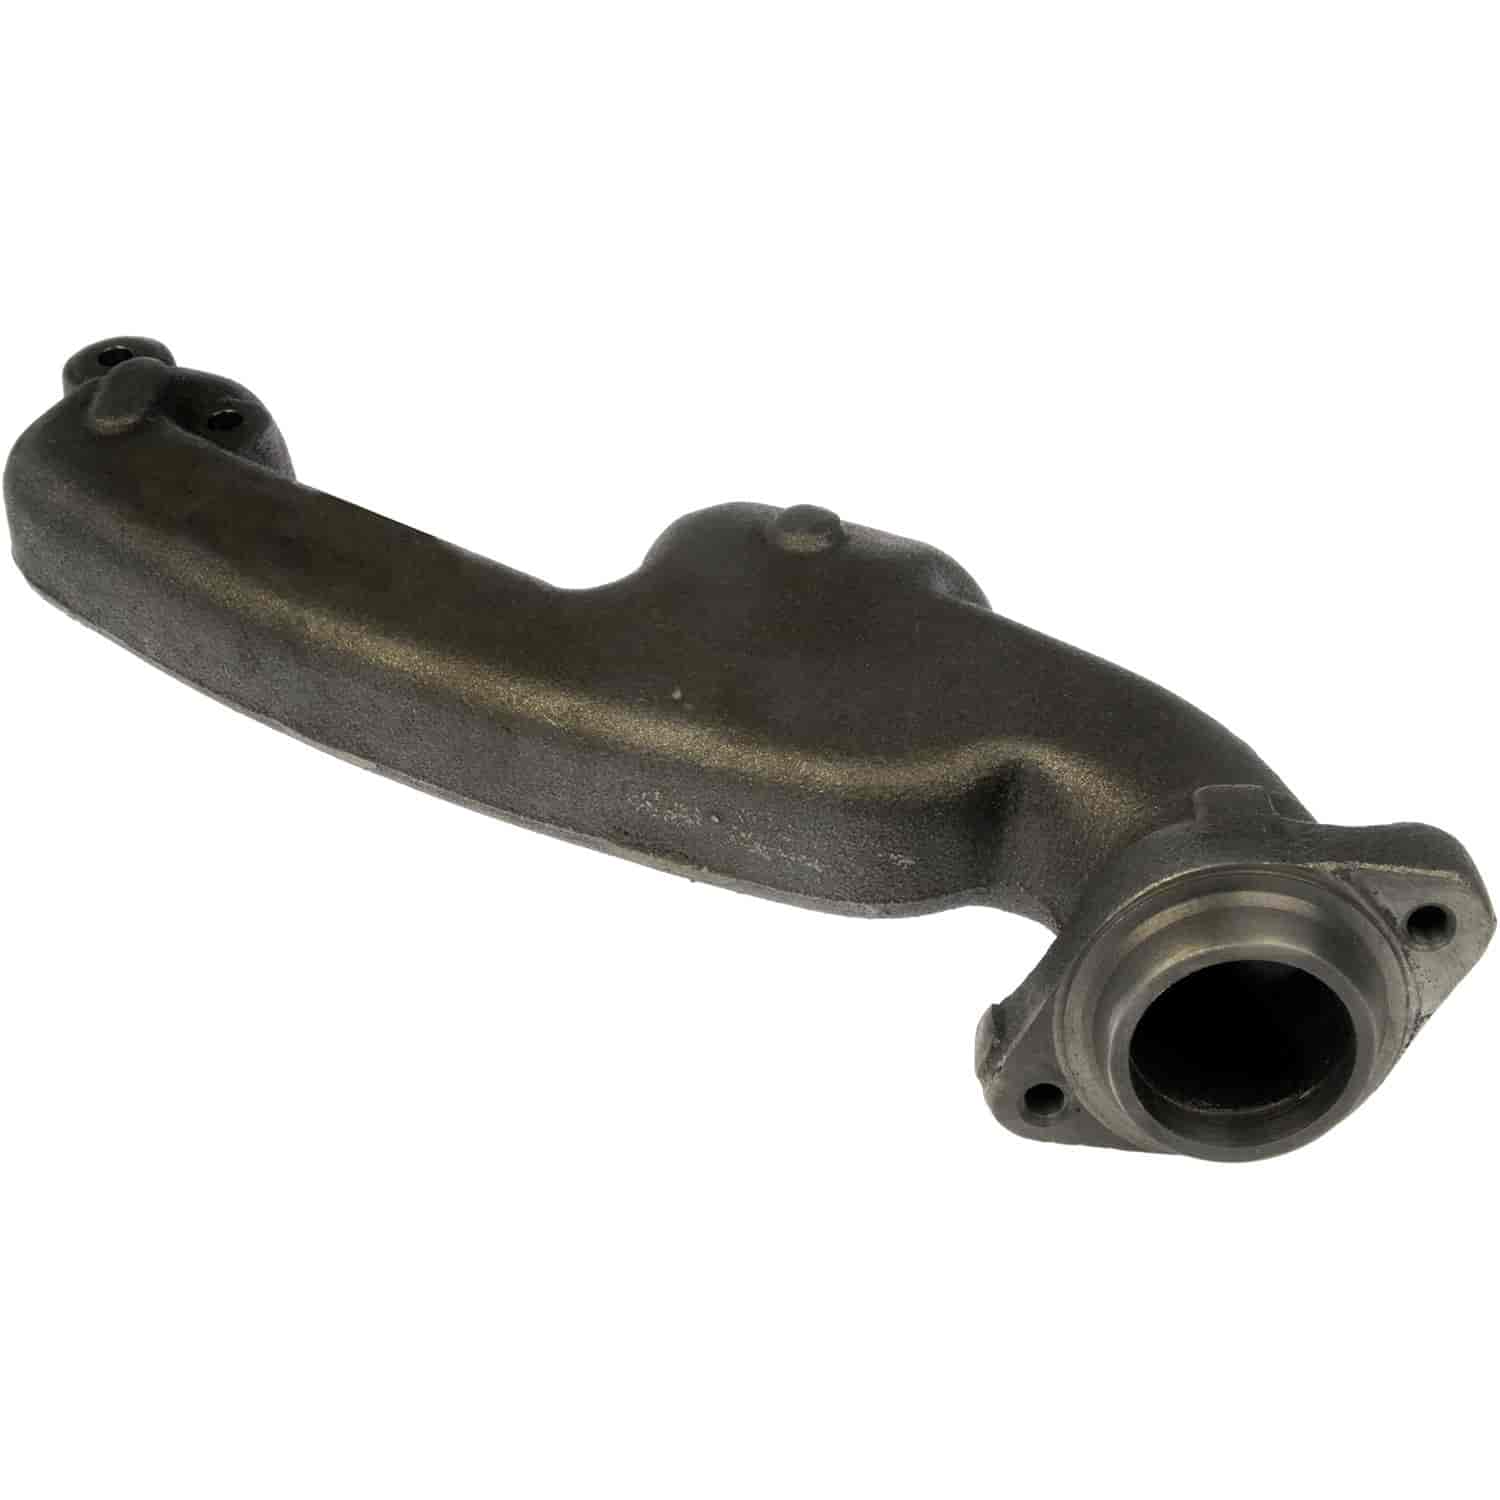 Exhaust Manifold Kit - Includes Required Hardware To Downpipe